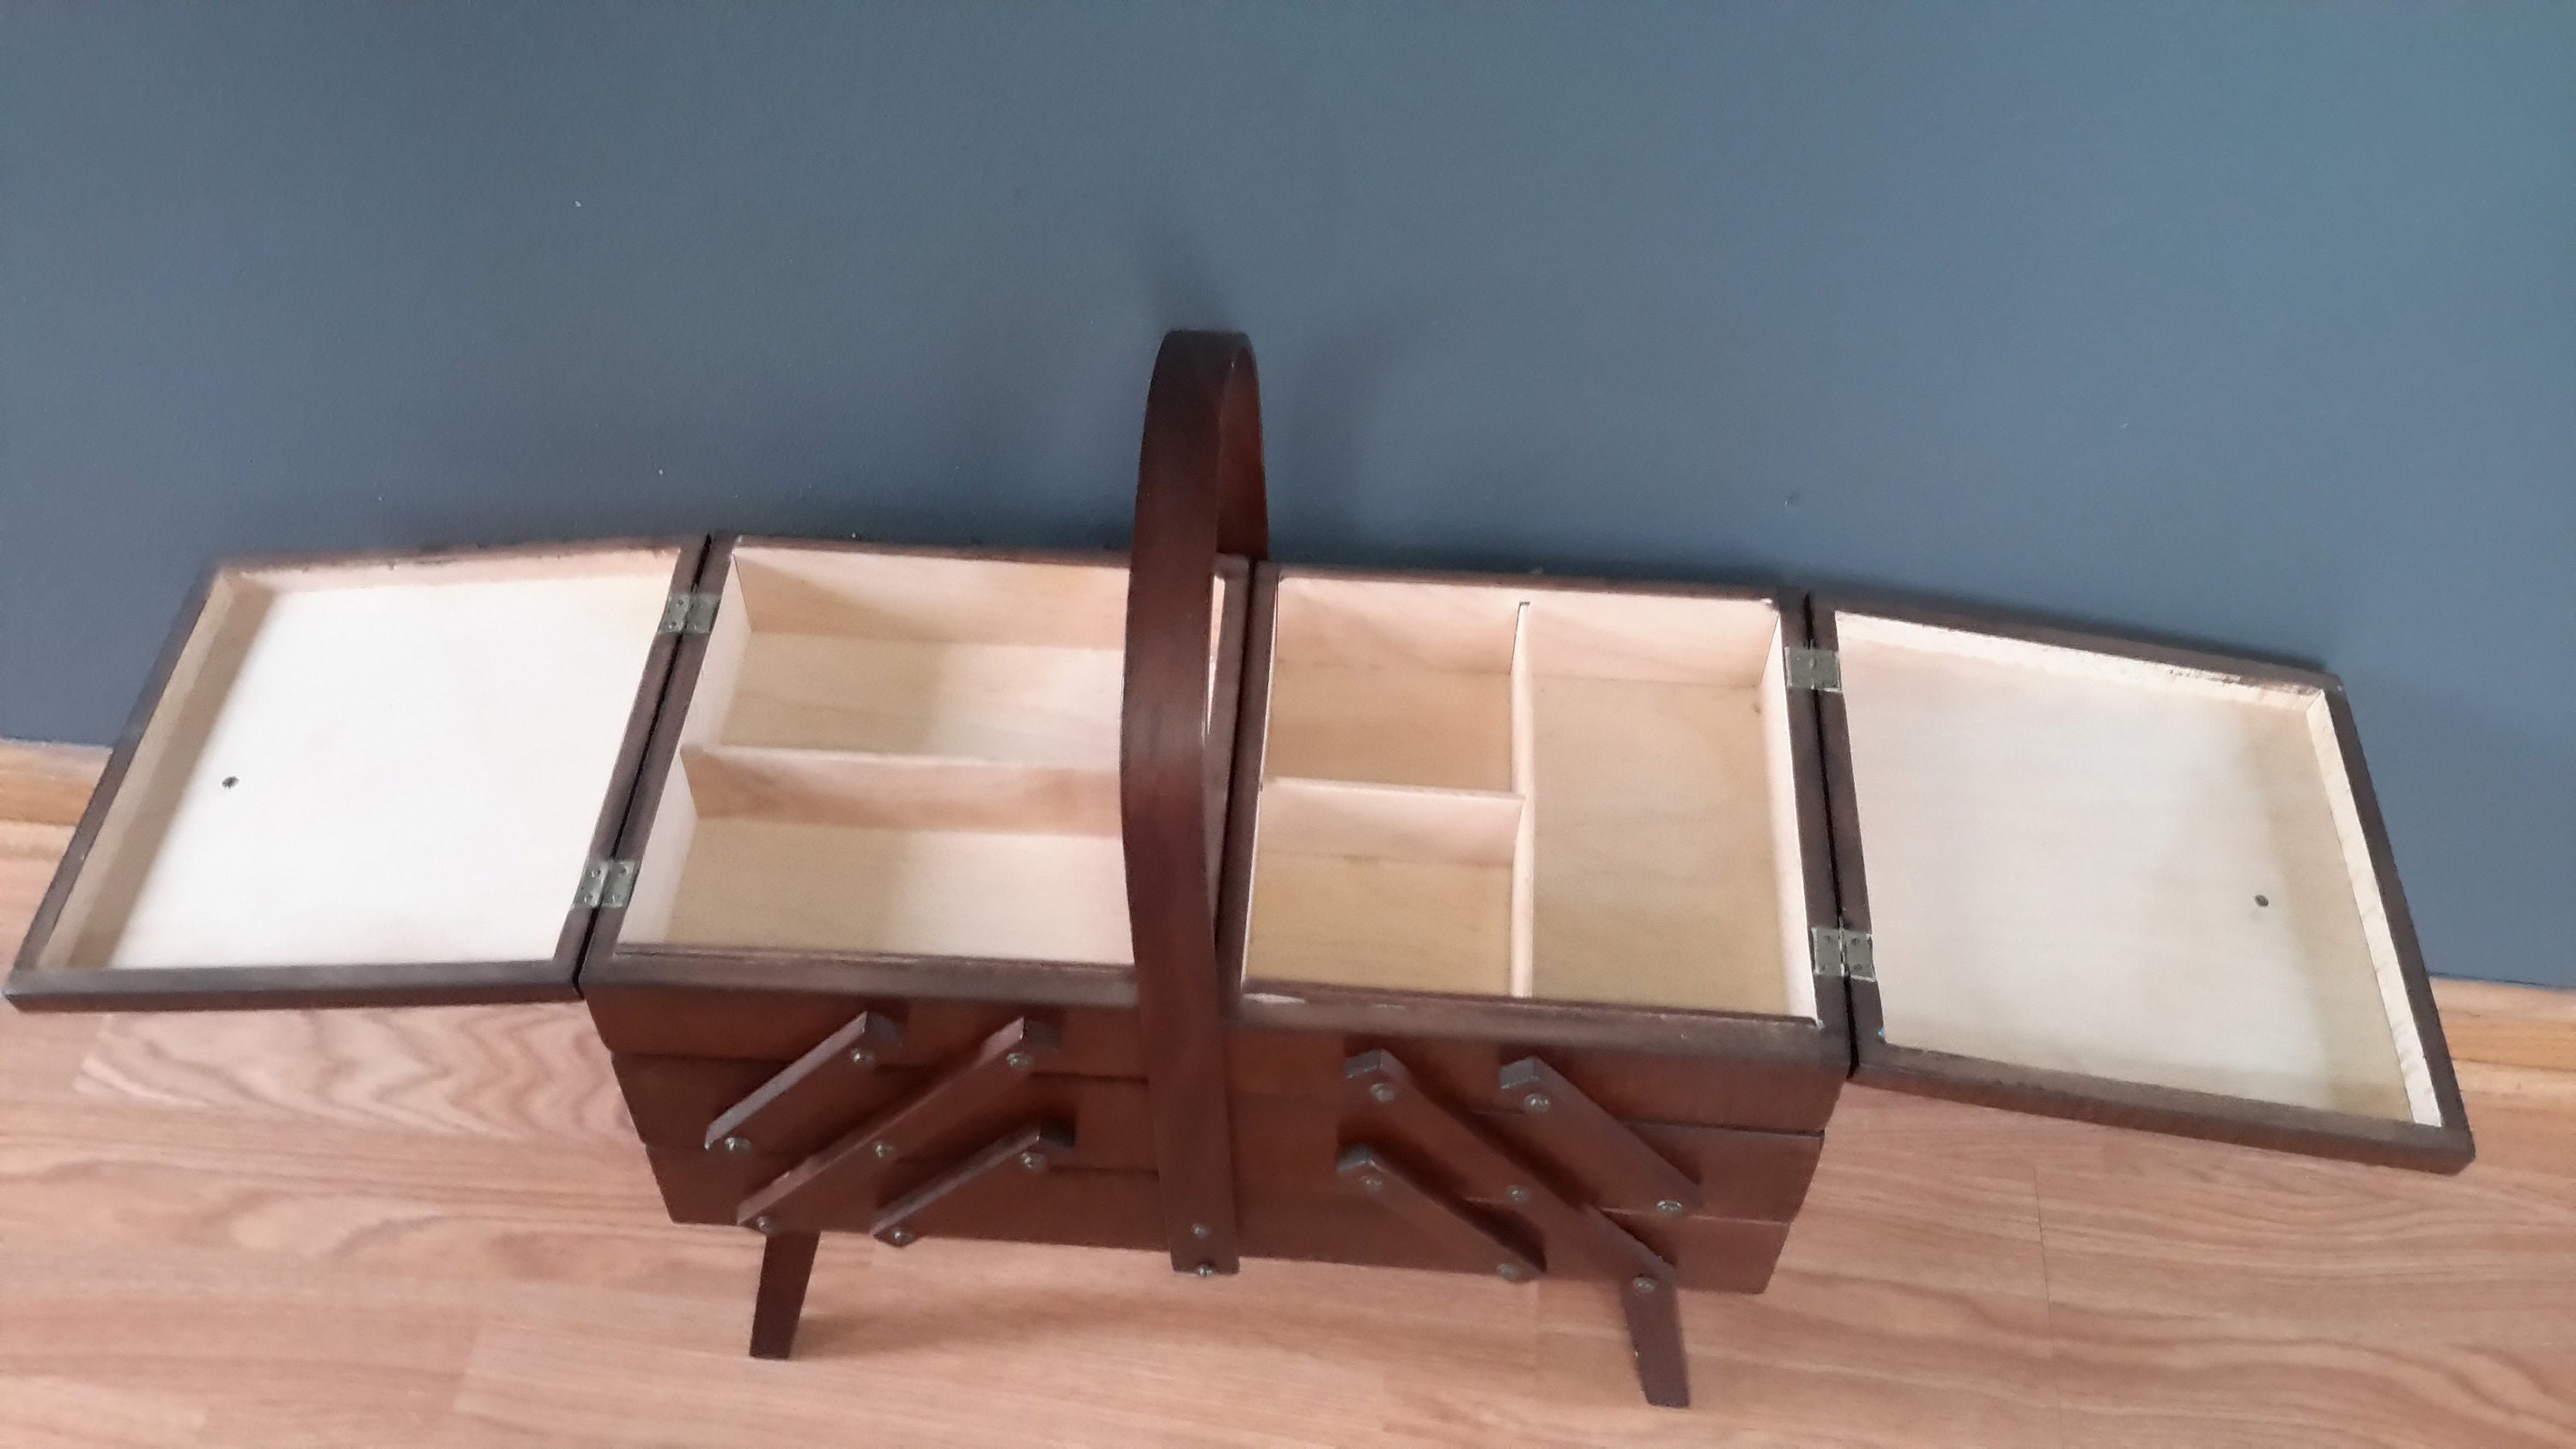 Vintage Wooden Accordian Fold Out 3 Tier Sewing Box - PLEASE READ